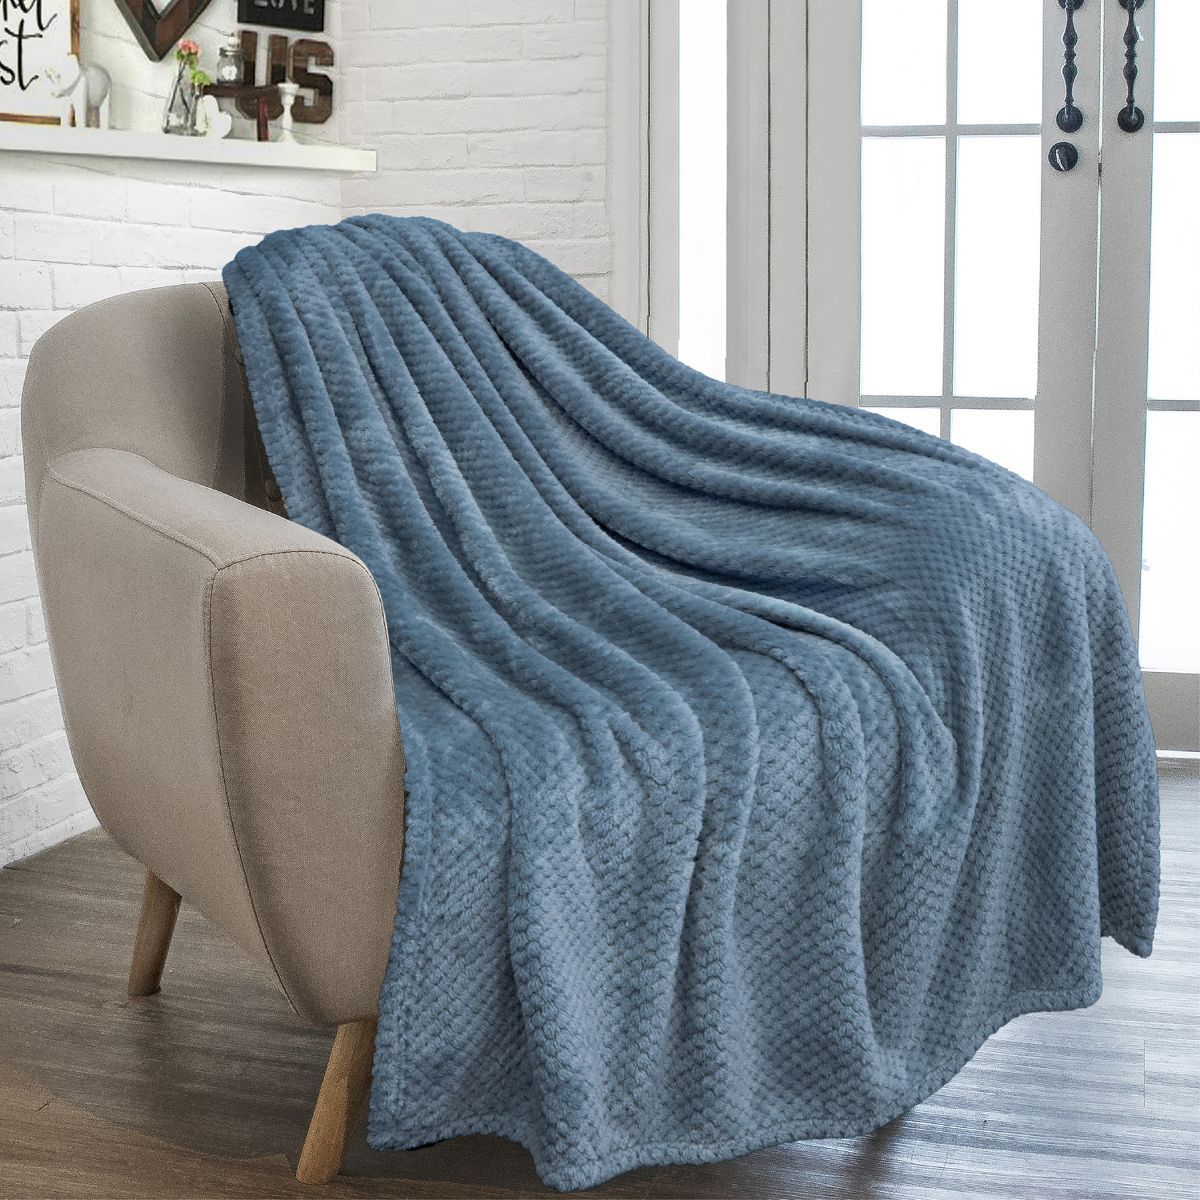 PAVILIA Soft Waffle Blanket Throw for Sofa Bed, Lightweight Plush Warm Blanket for Couch | Target